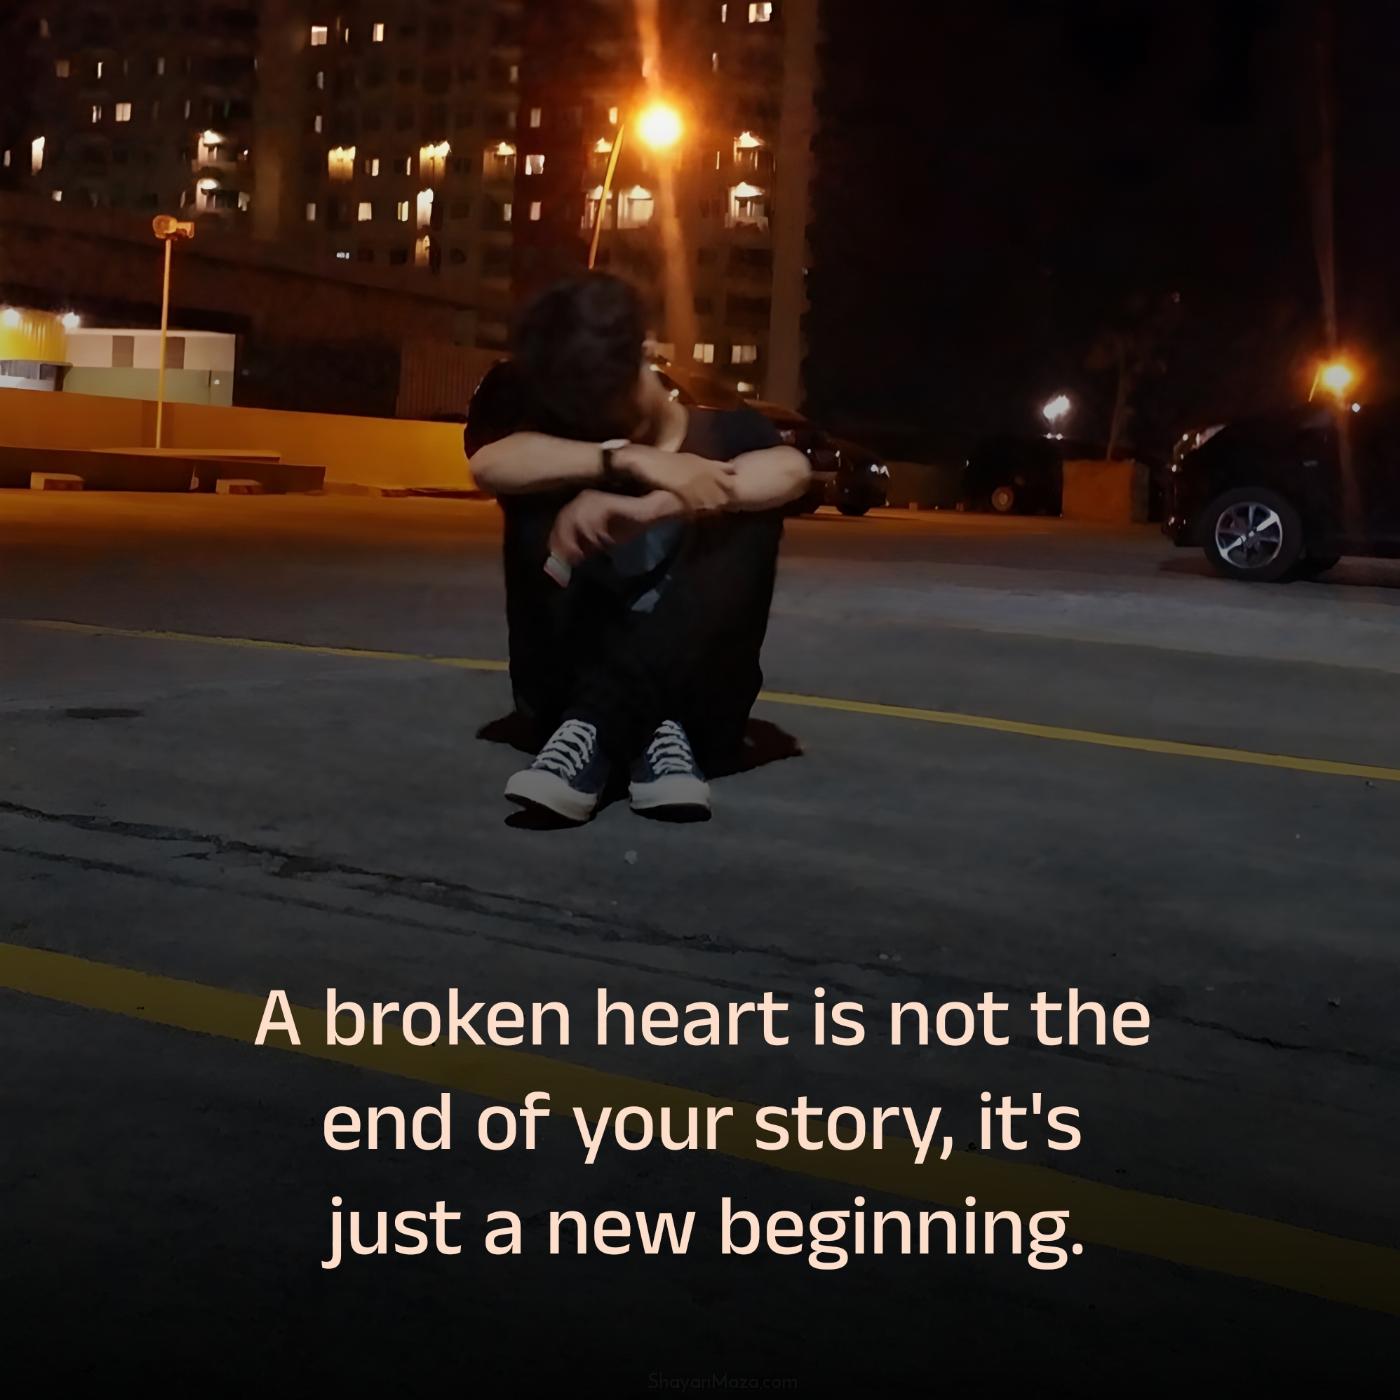 A broken heart is not the end of your story